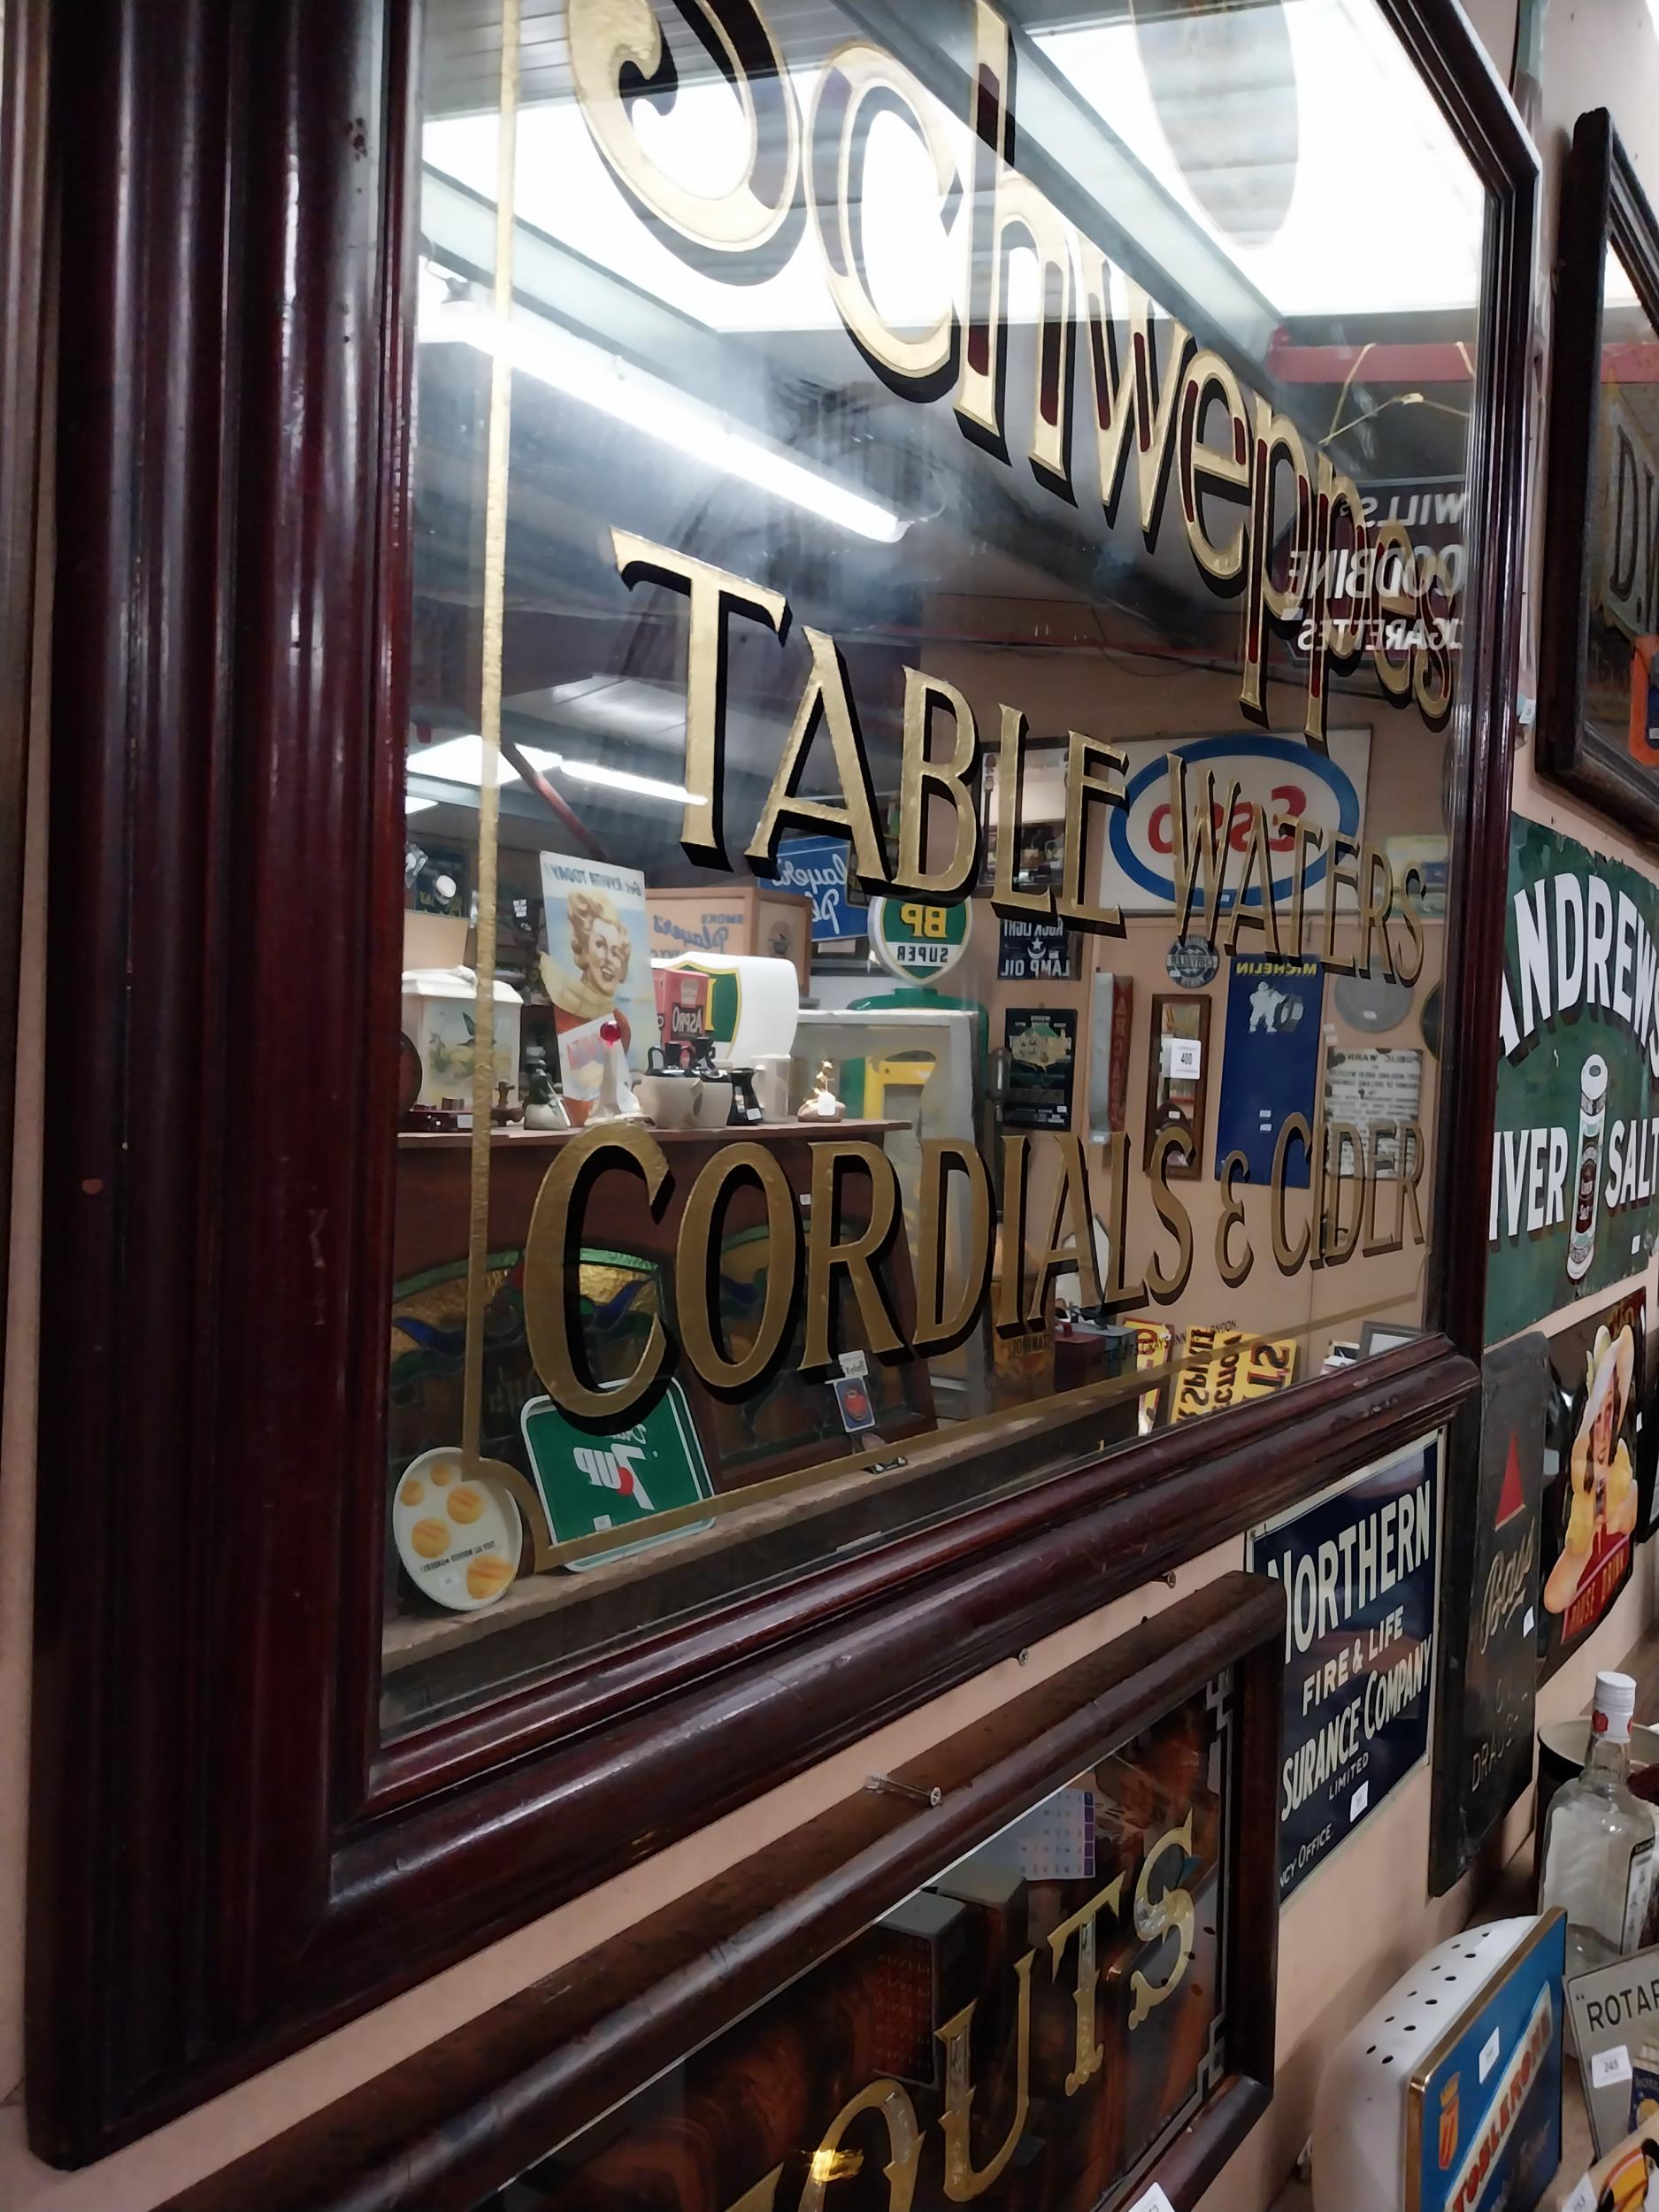 Schweppes Table Waters Cordials and Cider framed advertising mirror by J Carter 273 Grays Inn Road - Image 7 of 10